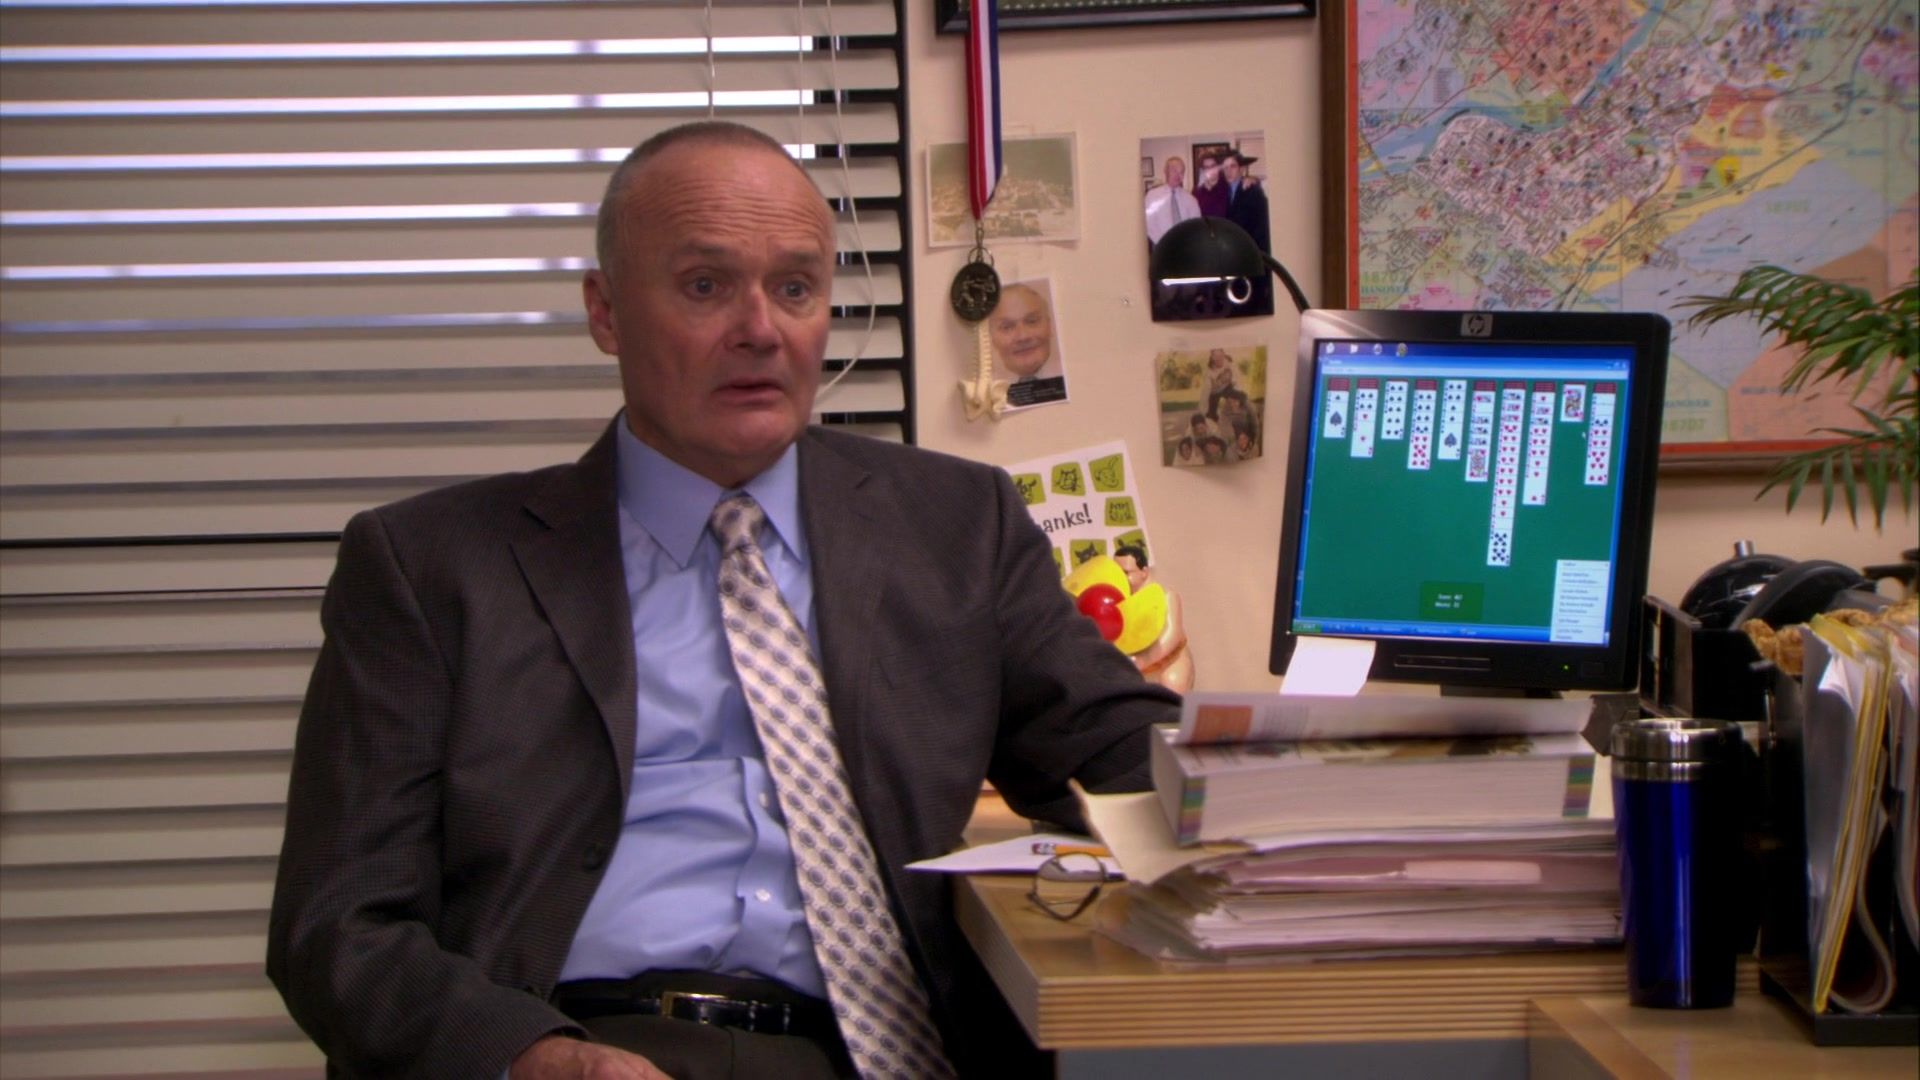 HP Monitor Used By Creed Bratton In The Office